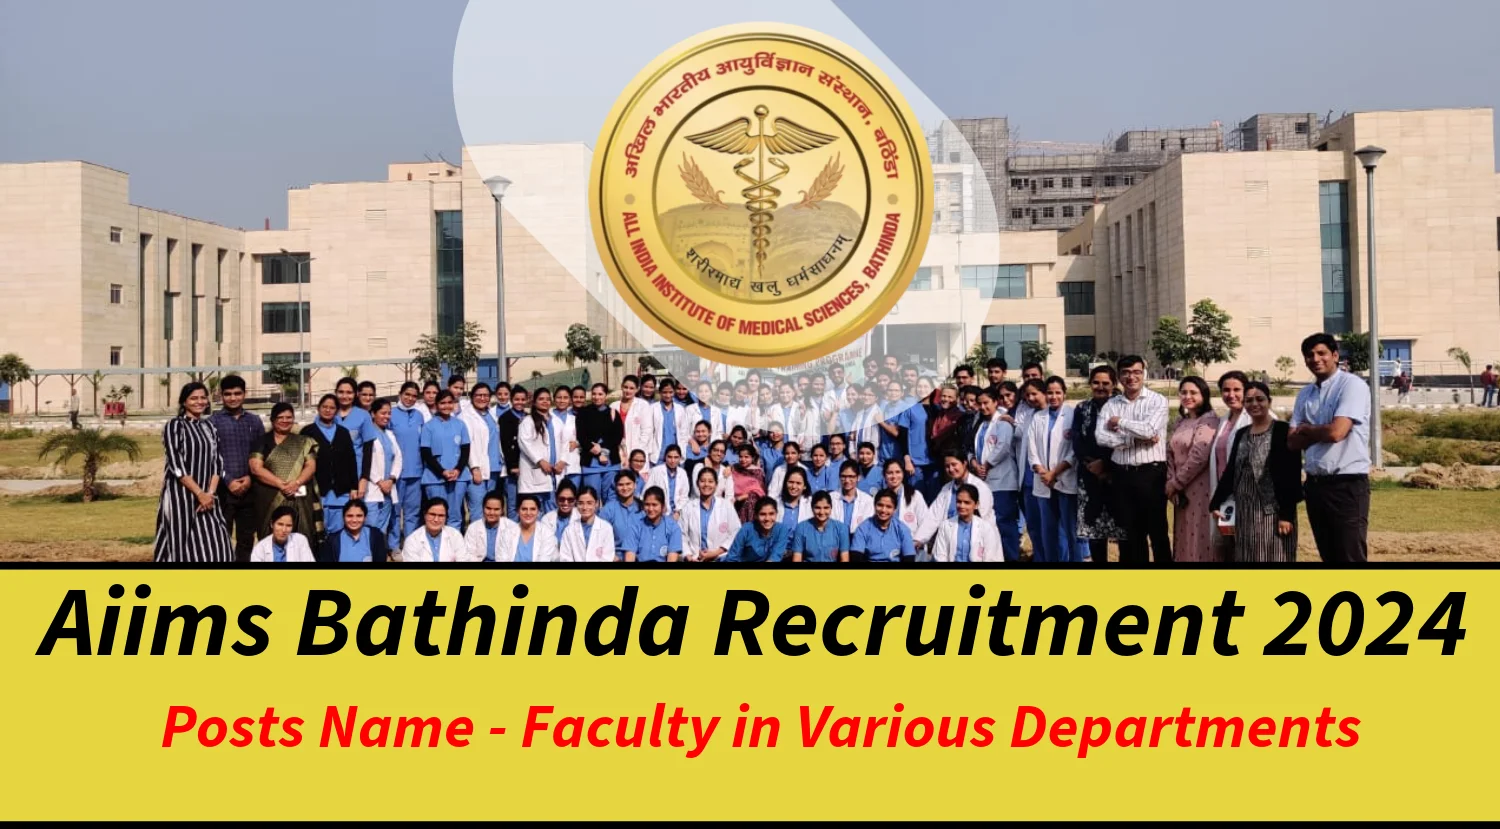 Aiims Bathinda Recruitment 2024 for Faculty Posts